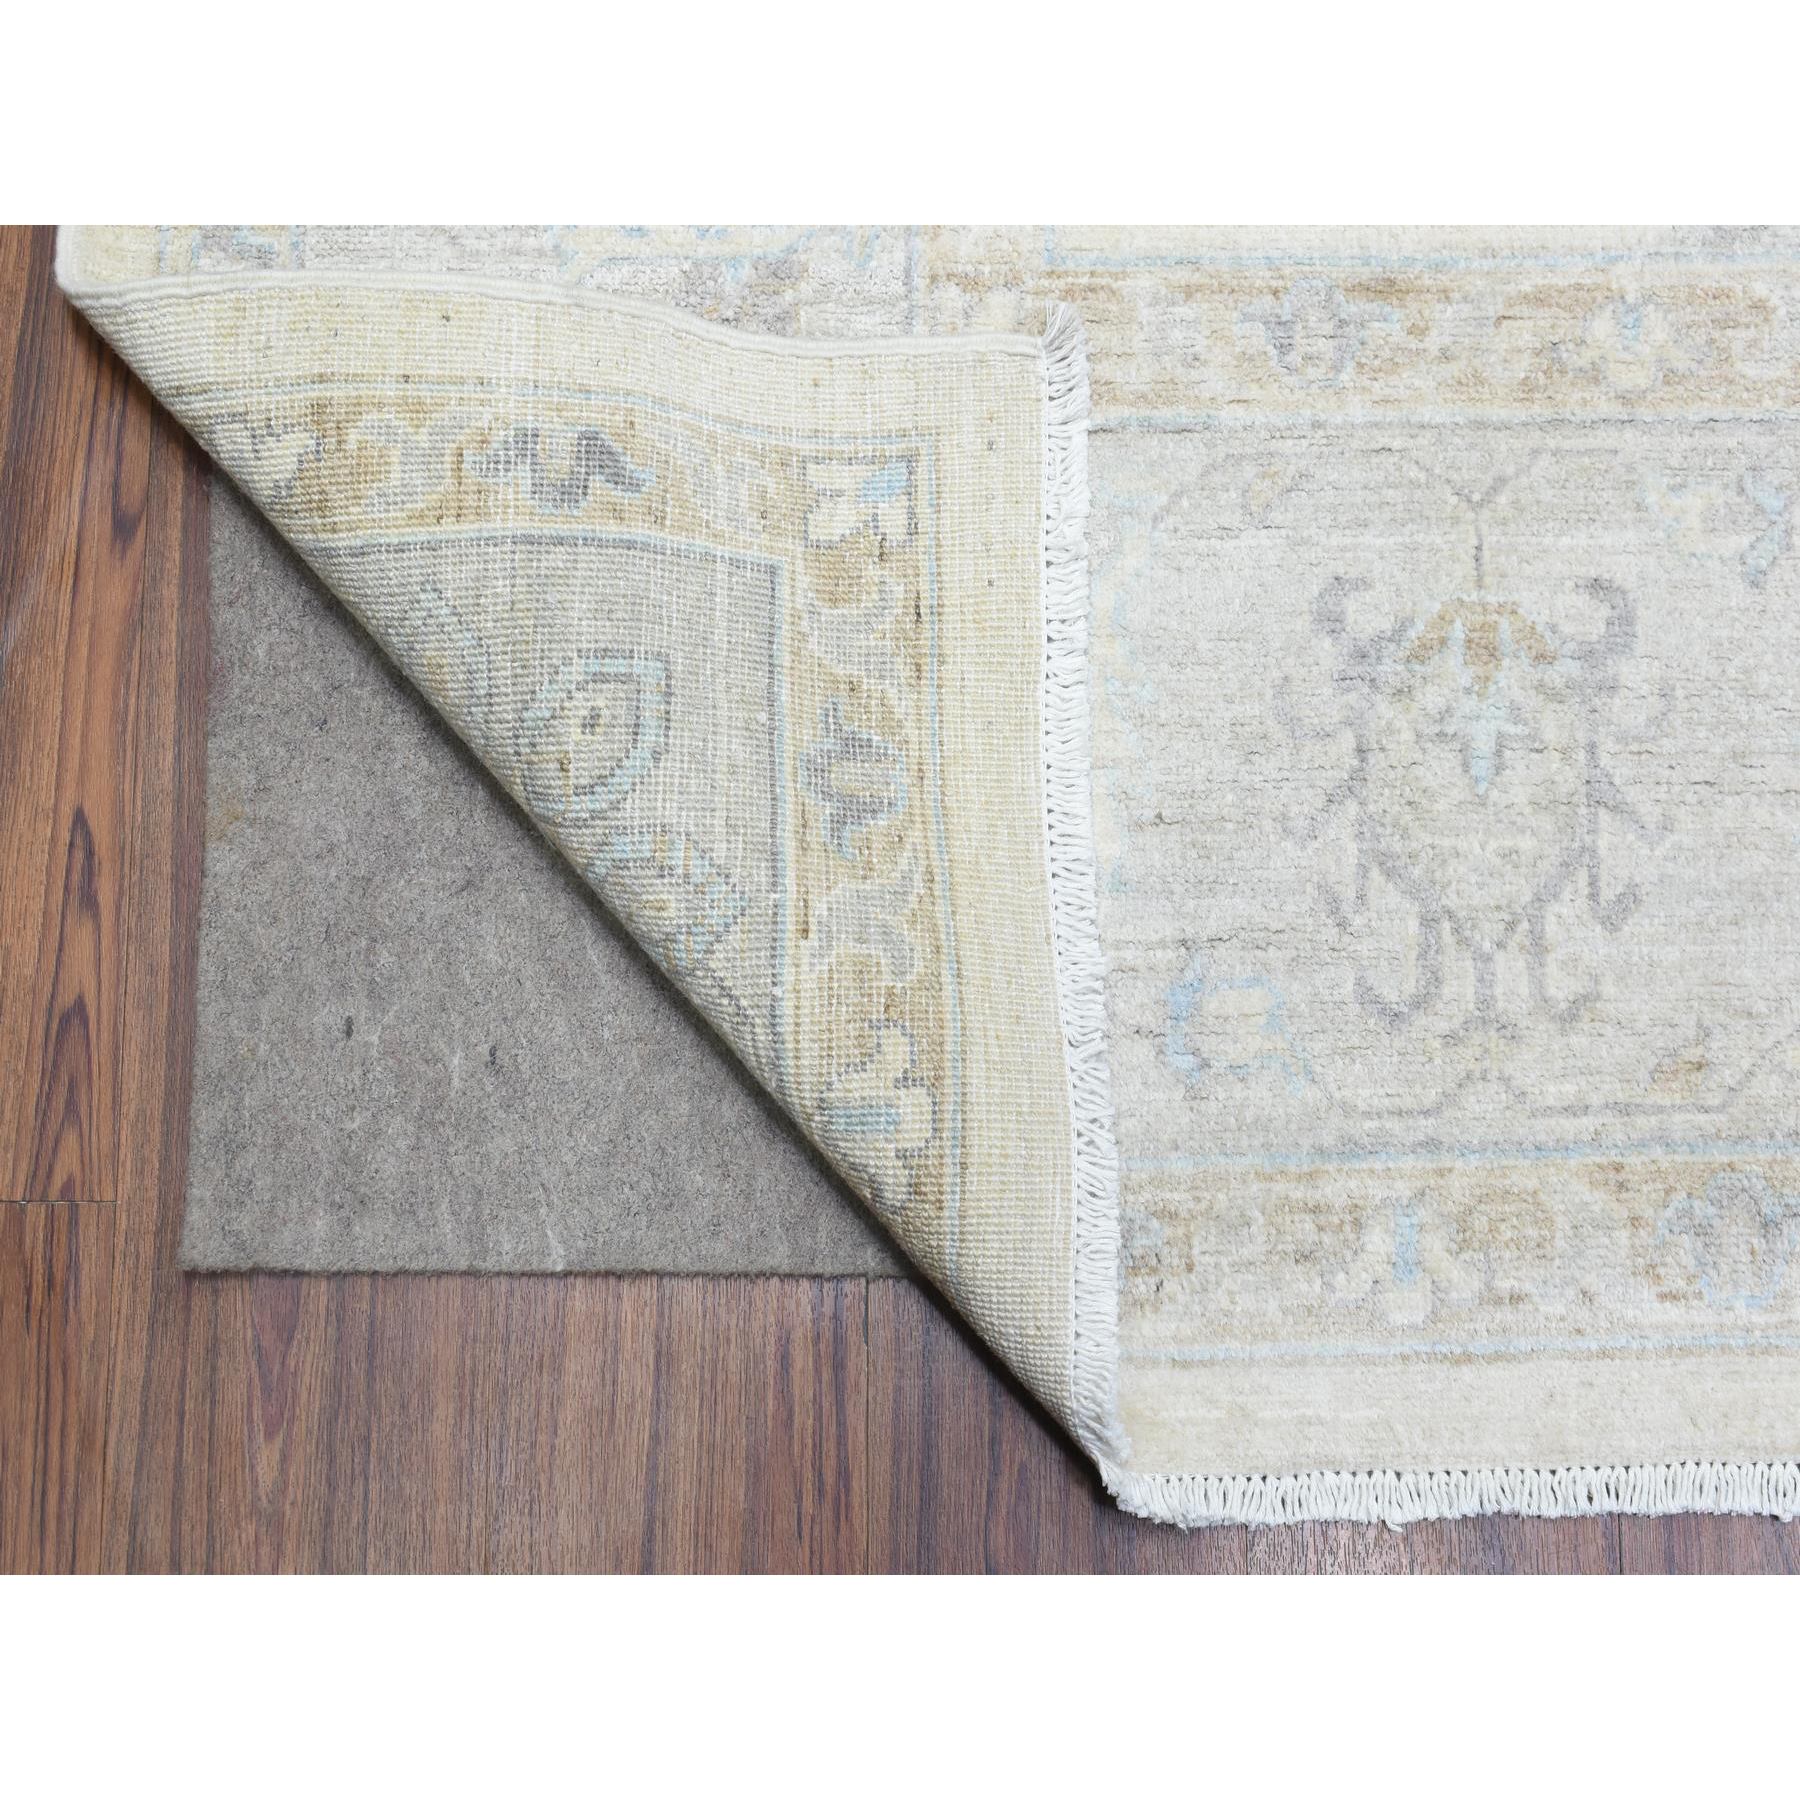 8'10"x11'7" Ivory, All Over Peshawar Antique Mahal Design Natural Dyes, Soft and Shiny Wool Hand Woven, Oriental Rug 